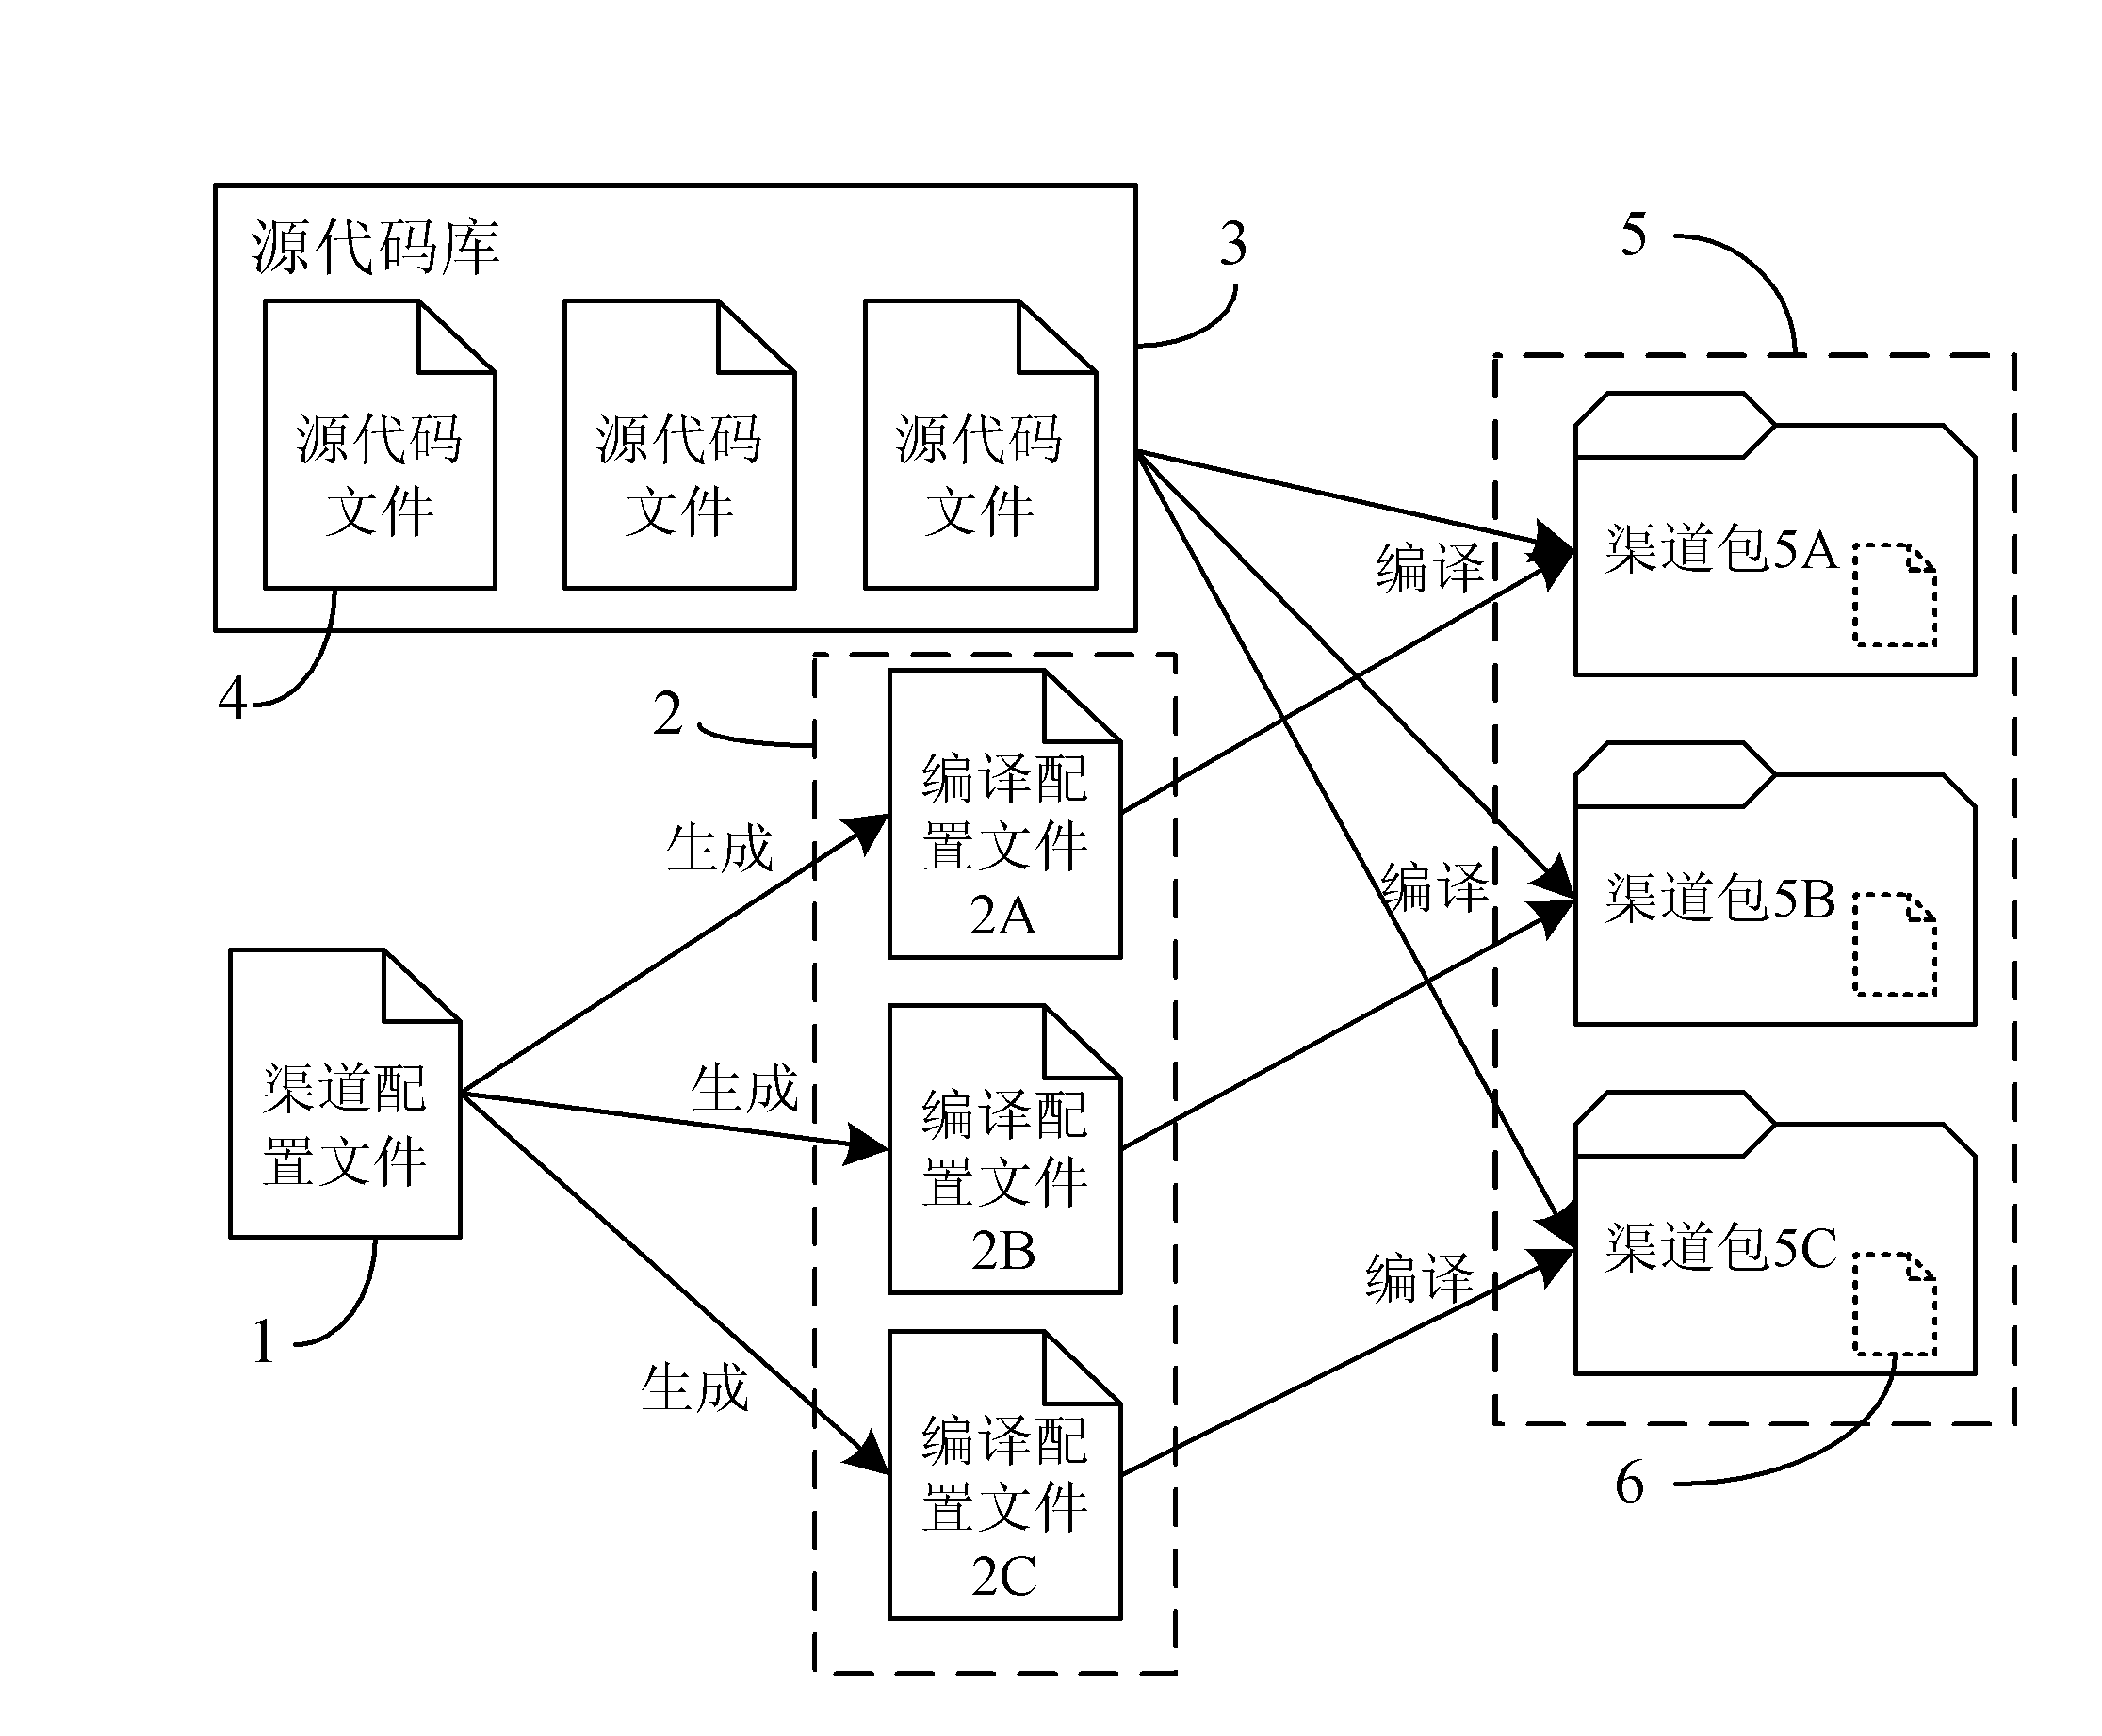 Method and system for releasing software